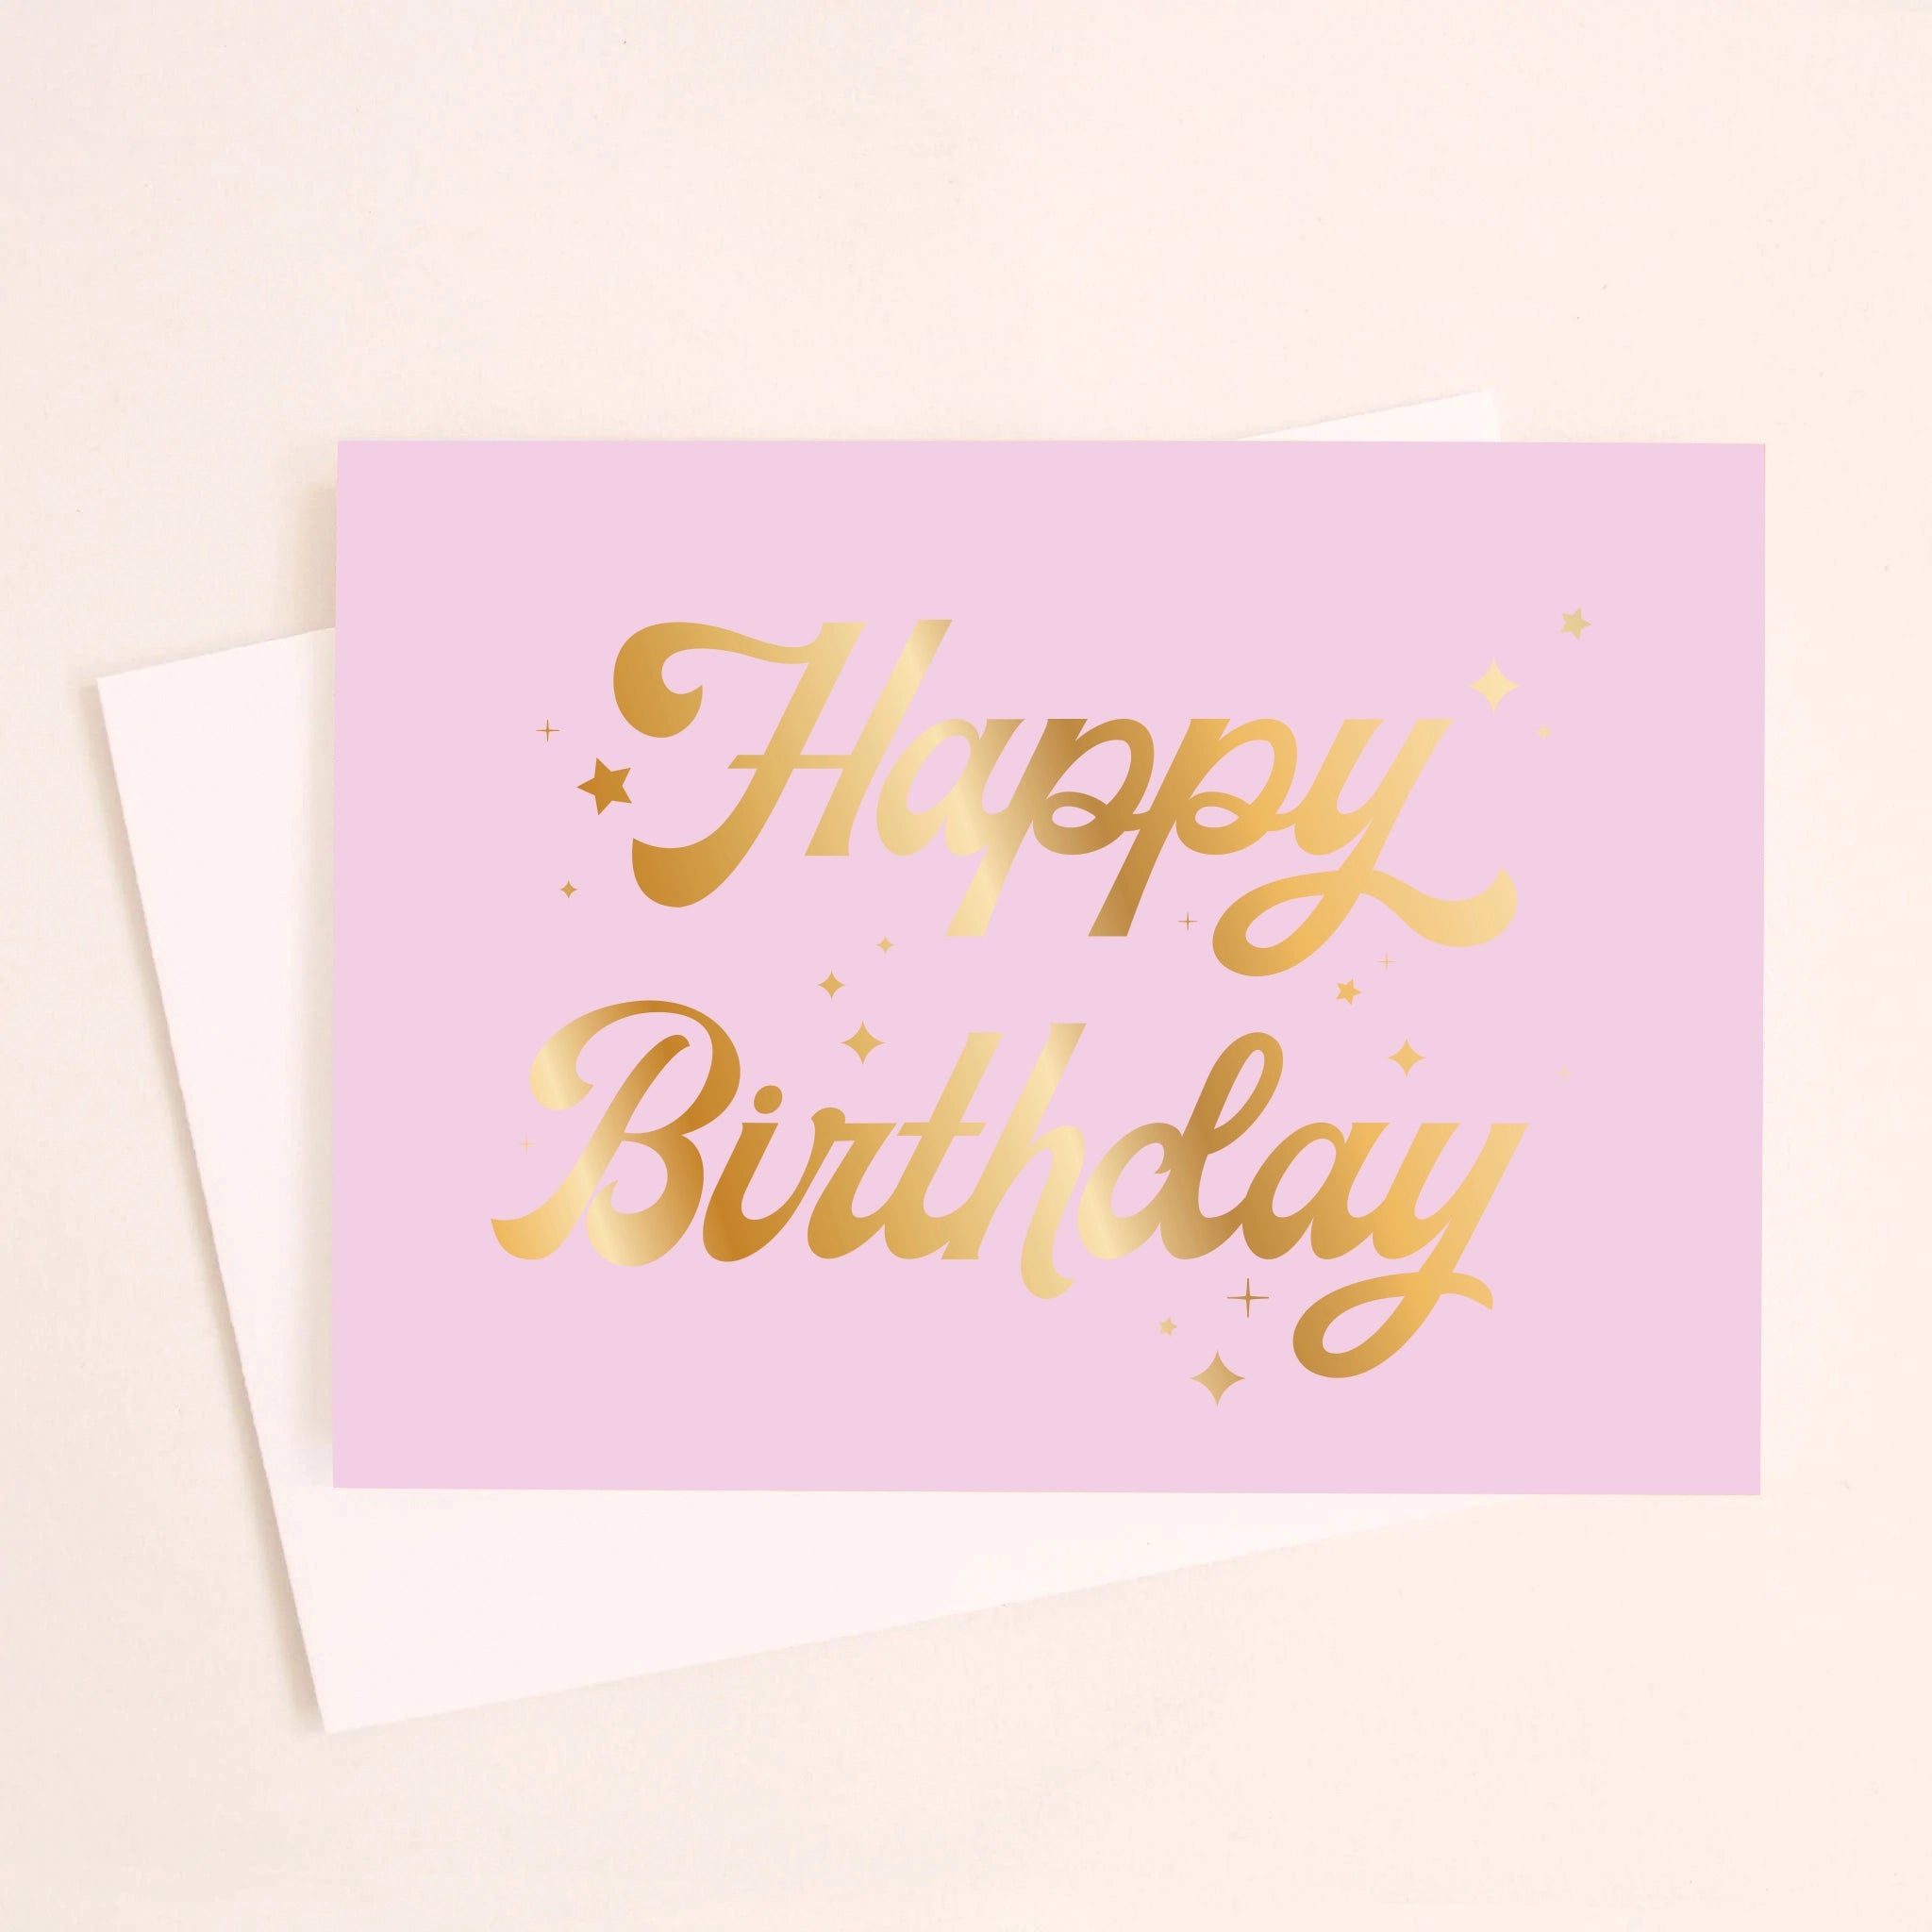 On a cream background is a lavender card with gold foiled cursive text that reads, &quot;Happy Birthday&quot; along with a white envelope.